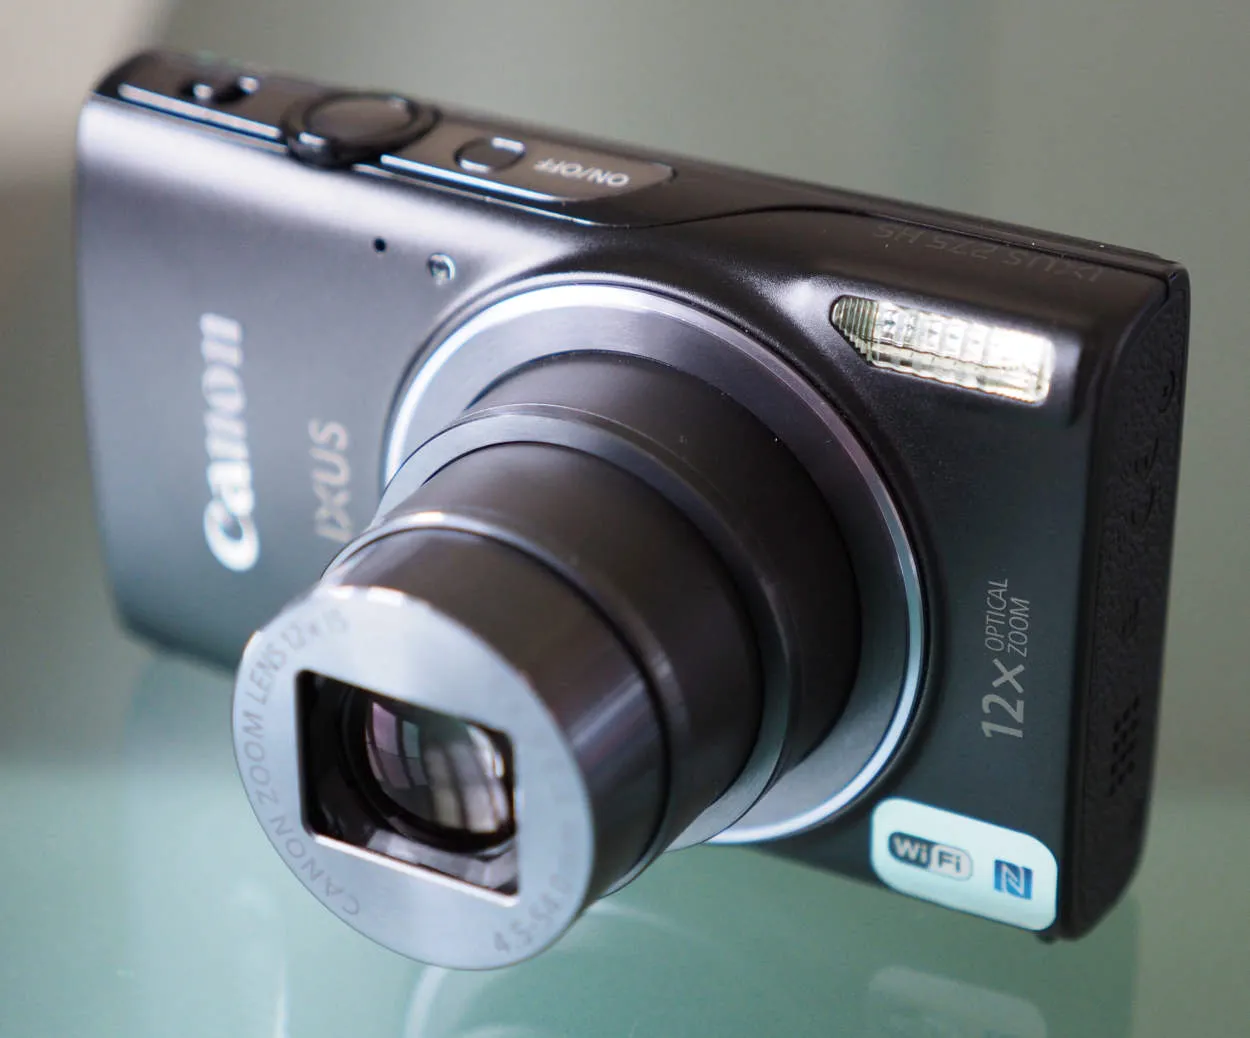 Affordable Photography: Budget-Friendly Cameras from Japan